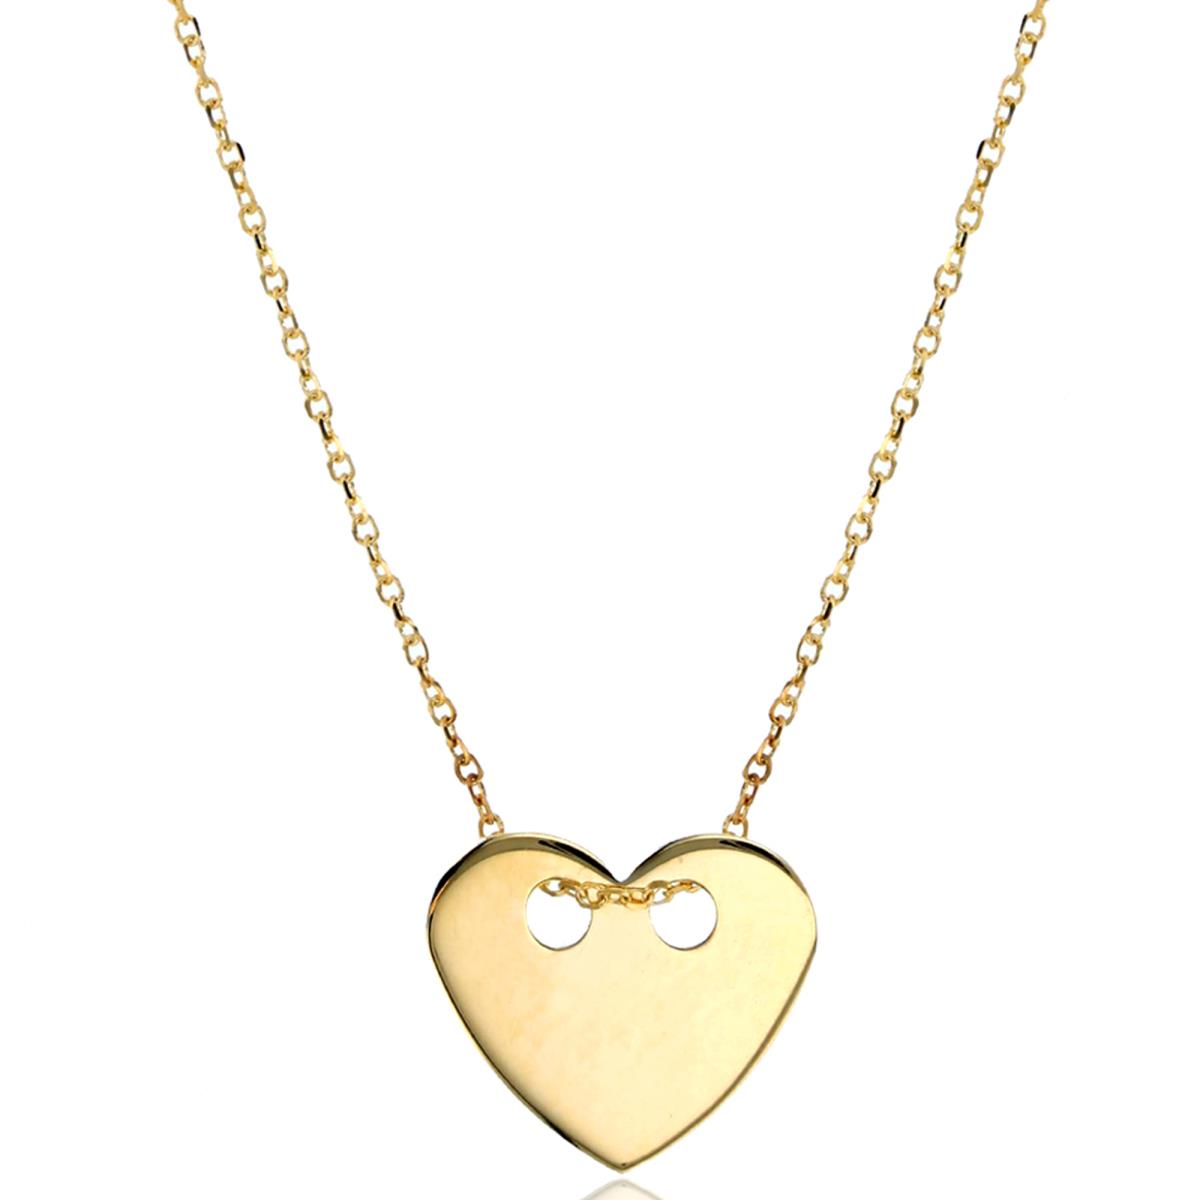 14K Yellow Gold Polished Heart Charm 15+1" Necklace with Passion Plate